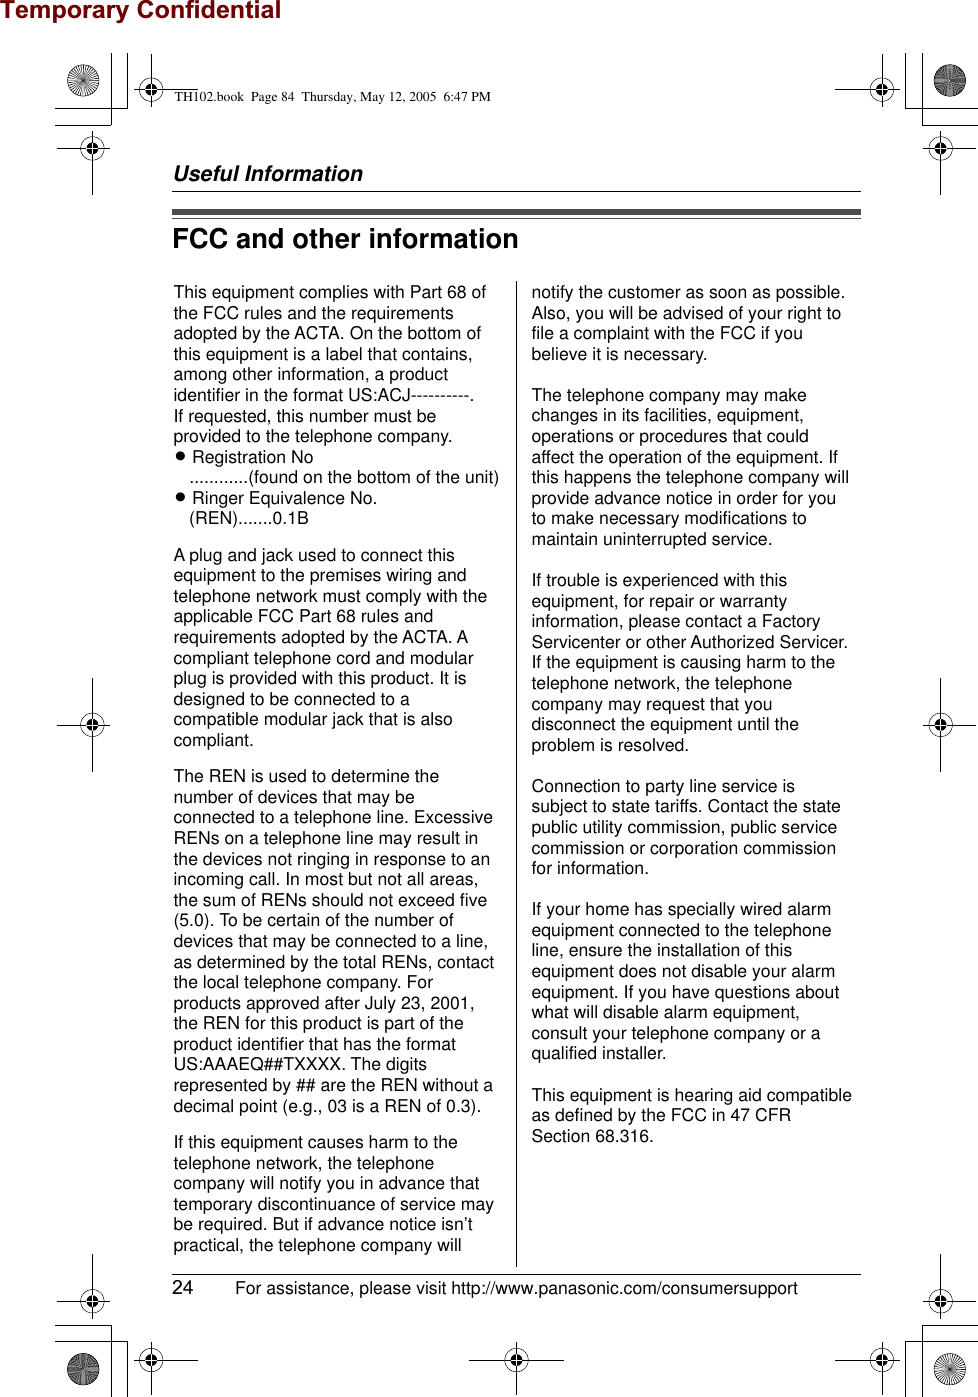 Temporary ConfidentialUseful Information24  For assistance, please visit http://www.panasonic.com/consumersupportFCC and other informationThis equipment complies with Part 68 of the FCC rules and the requirements adopted by the ACTA. On the bottom of this equipment is a label that contains, among other information, a product identifier in the format US:ACJ----------.If requested, this number must be provided to the telephone company.L Registration No   ............(found on the bottom of the unit)L Ringer Equivalence No.   (REN).......0.1BA plug and jack used to connect this equipment to the premises wiring and telephone network must comply with the applicable FCC Part 68 rules and requirements adopted by the ACTA. A compliant telephone cord and modular plug is provided with this product. It is designed to be connected to a compatible modular jack that is also compliant.The REN is used to determine the number of devices that may be connected to a telephone line. Excessive RENs on a telephone line may result in the devices not ringing in response to an incoming call. In most but not all areas, the sum of RENs should not exceed five (5.0). To be certain of the number of devices that may be connected to a line, as determined by the total RENs, contact the local telephone company. For products approved after July 23, 2001, the REN for this product is part of the product identifier that has the format US:AAAEQ##TXXXX. The digits represented by ## are the REN without a decimal point (e.g., 03 is a REN of 0.3).If this equipment causes harm to the telephone network, the telephone company will notify you in advance that  temporary discontinuance of service may be required. But if advance notice isn’t practical, the telephone company will notify the customer as soon as possible. Also, you will be advised of your right to file a complaint with the FCC if you believe it is necessary.The telephone company may make changes in its facilities, equipment, operations or procedures that could affect the operation of the equipment. If this happens the telephone company will provide advance notice in order for you to make necessary modifications to maintain uninterrupted service.If trouble is experienced with this equipment, for repair or warranty information, please contact a Factory Servicenter or other Authorized Servicer. If the equipment is causing harm to the telephone network, the telephone company may request that you disconnect the equipment until the problem is resolved.Connection to party line service is subject to state tariffs. Contact the state public utility commission, public service commission or corporation commission for information.If your home has specially wired alarm equipment connected to the telephone line, ensure the installation of this equipment does not disable your alarm equipment. If you have questions about what will disable alarm equipment, consult your telephone company or a qualified installer.This equipment is hearing aid compatible as defined by the FCC in 47 CFR Section 68.316.TH102.book  Page 84  Thursday, May 12, 2005  6:47 PM